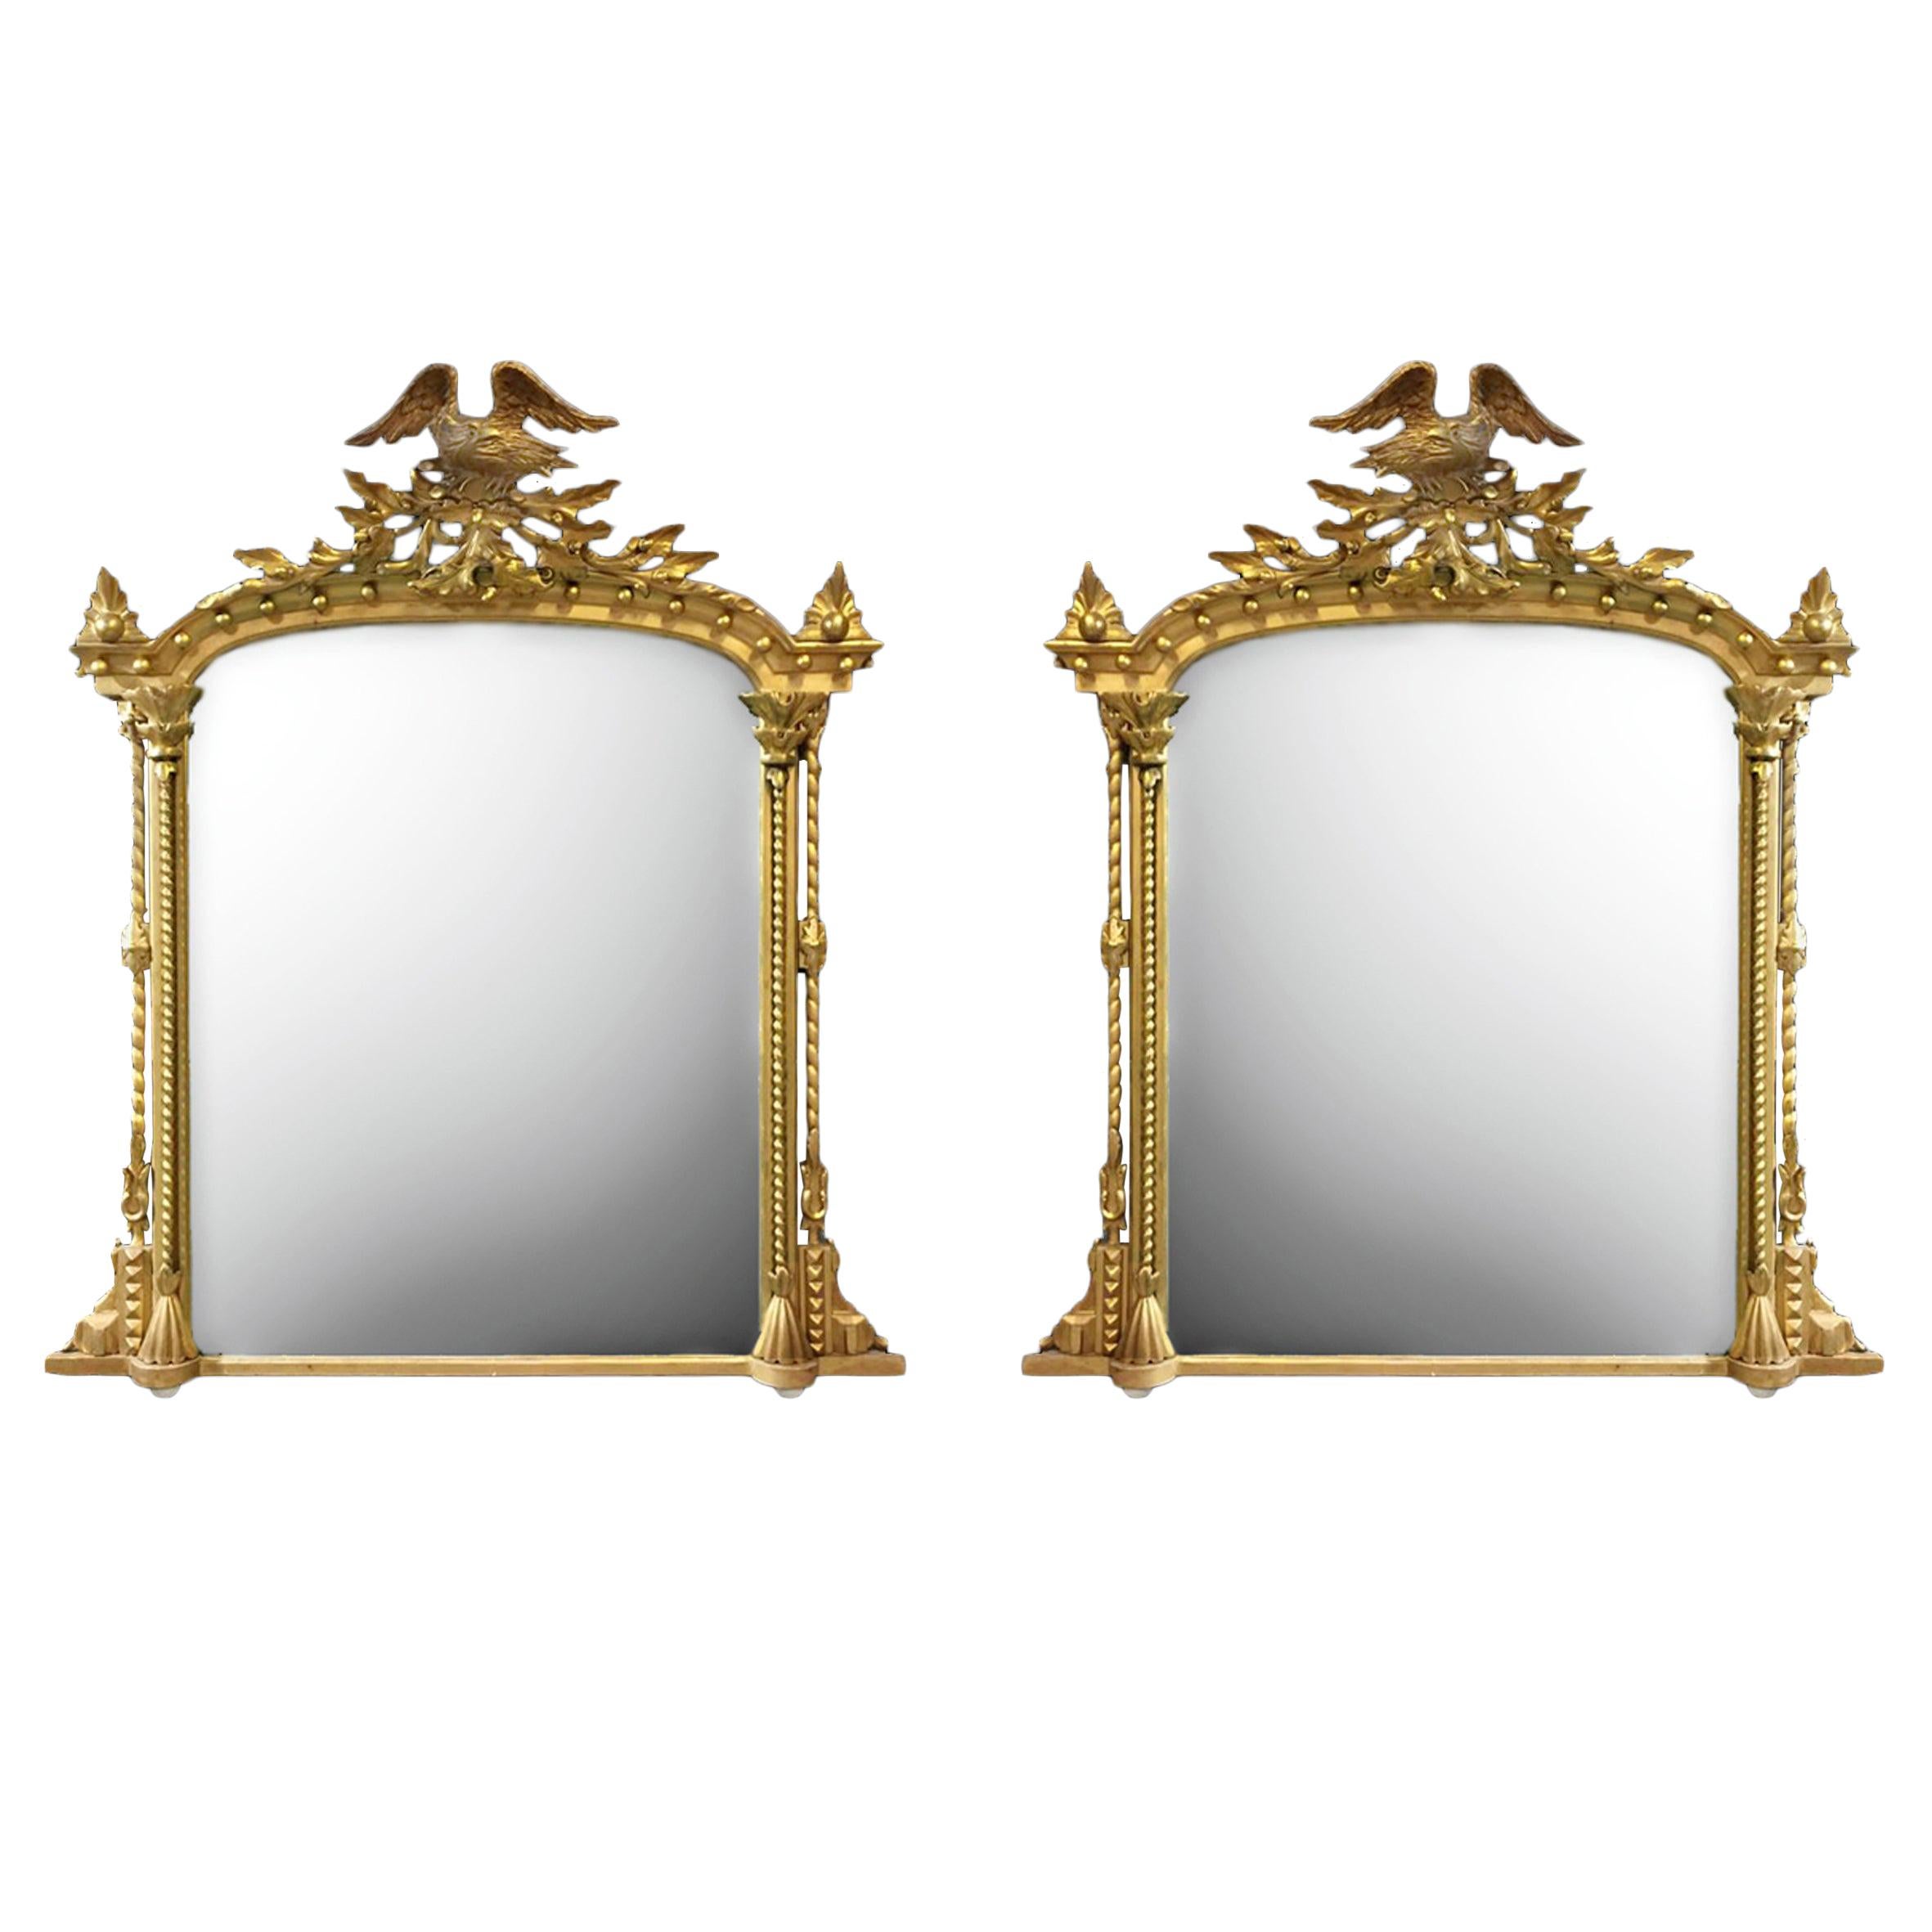 Pair of Giltwood Mirrors with Eagle Crestings For Sale